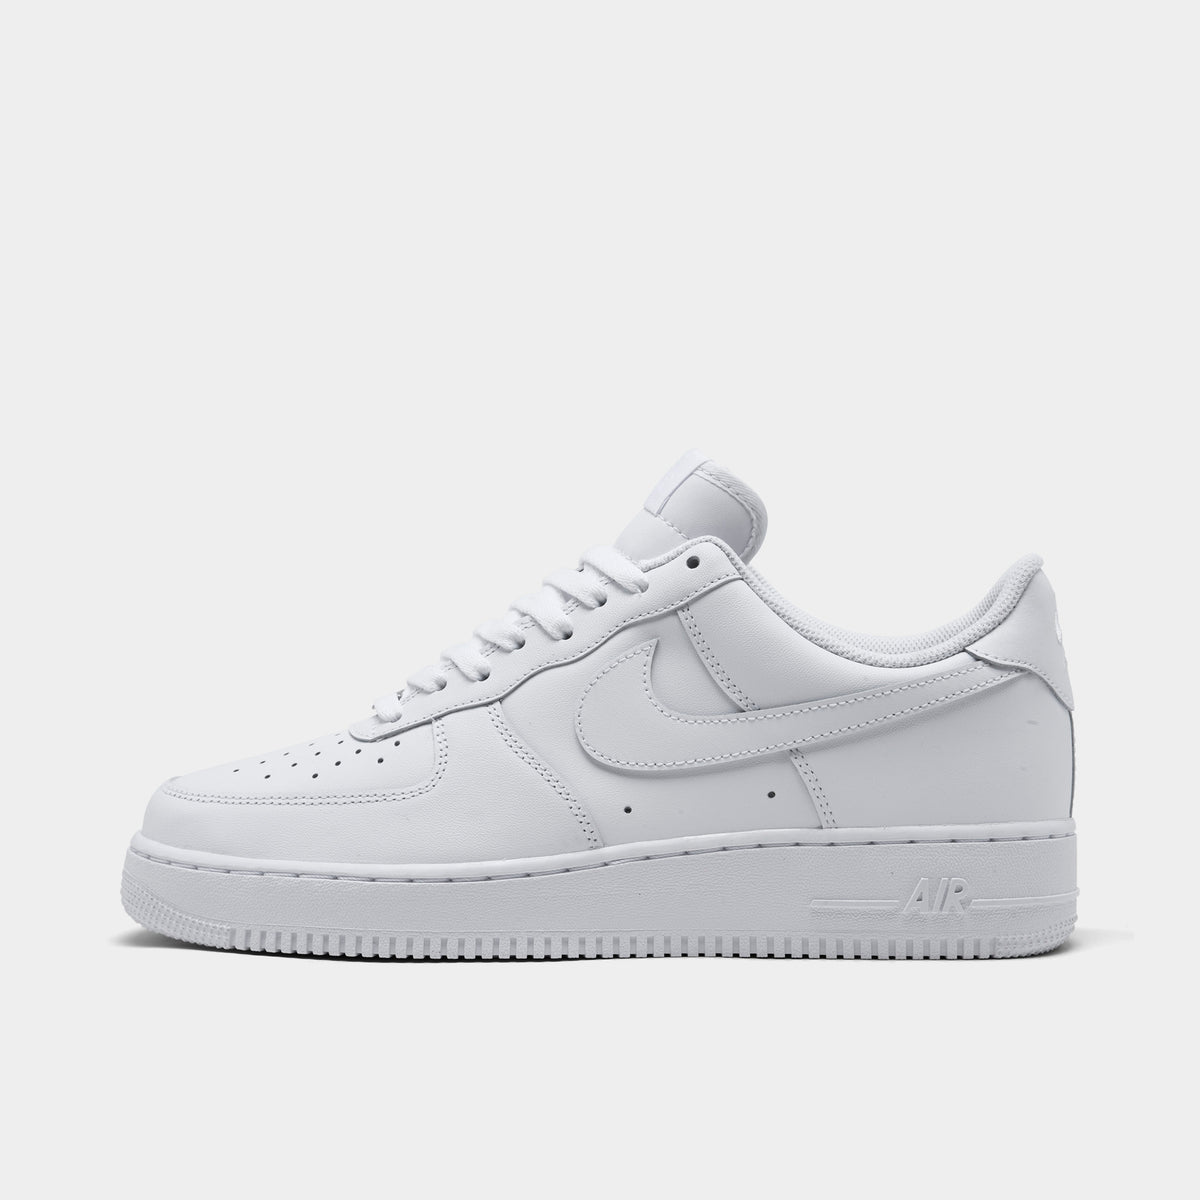 the white air forces